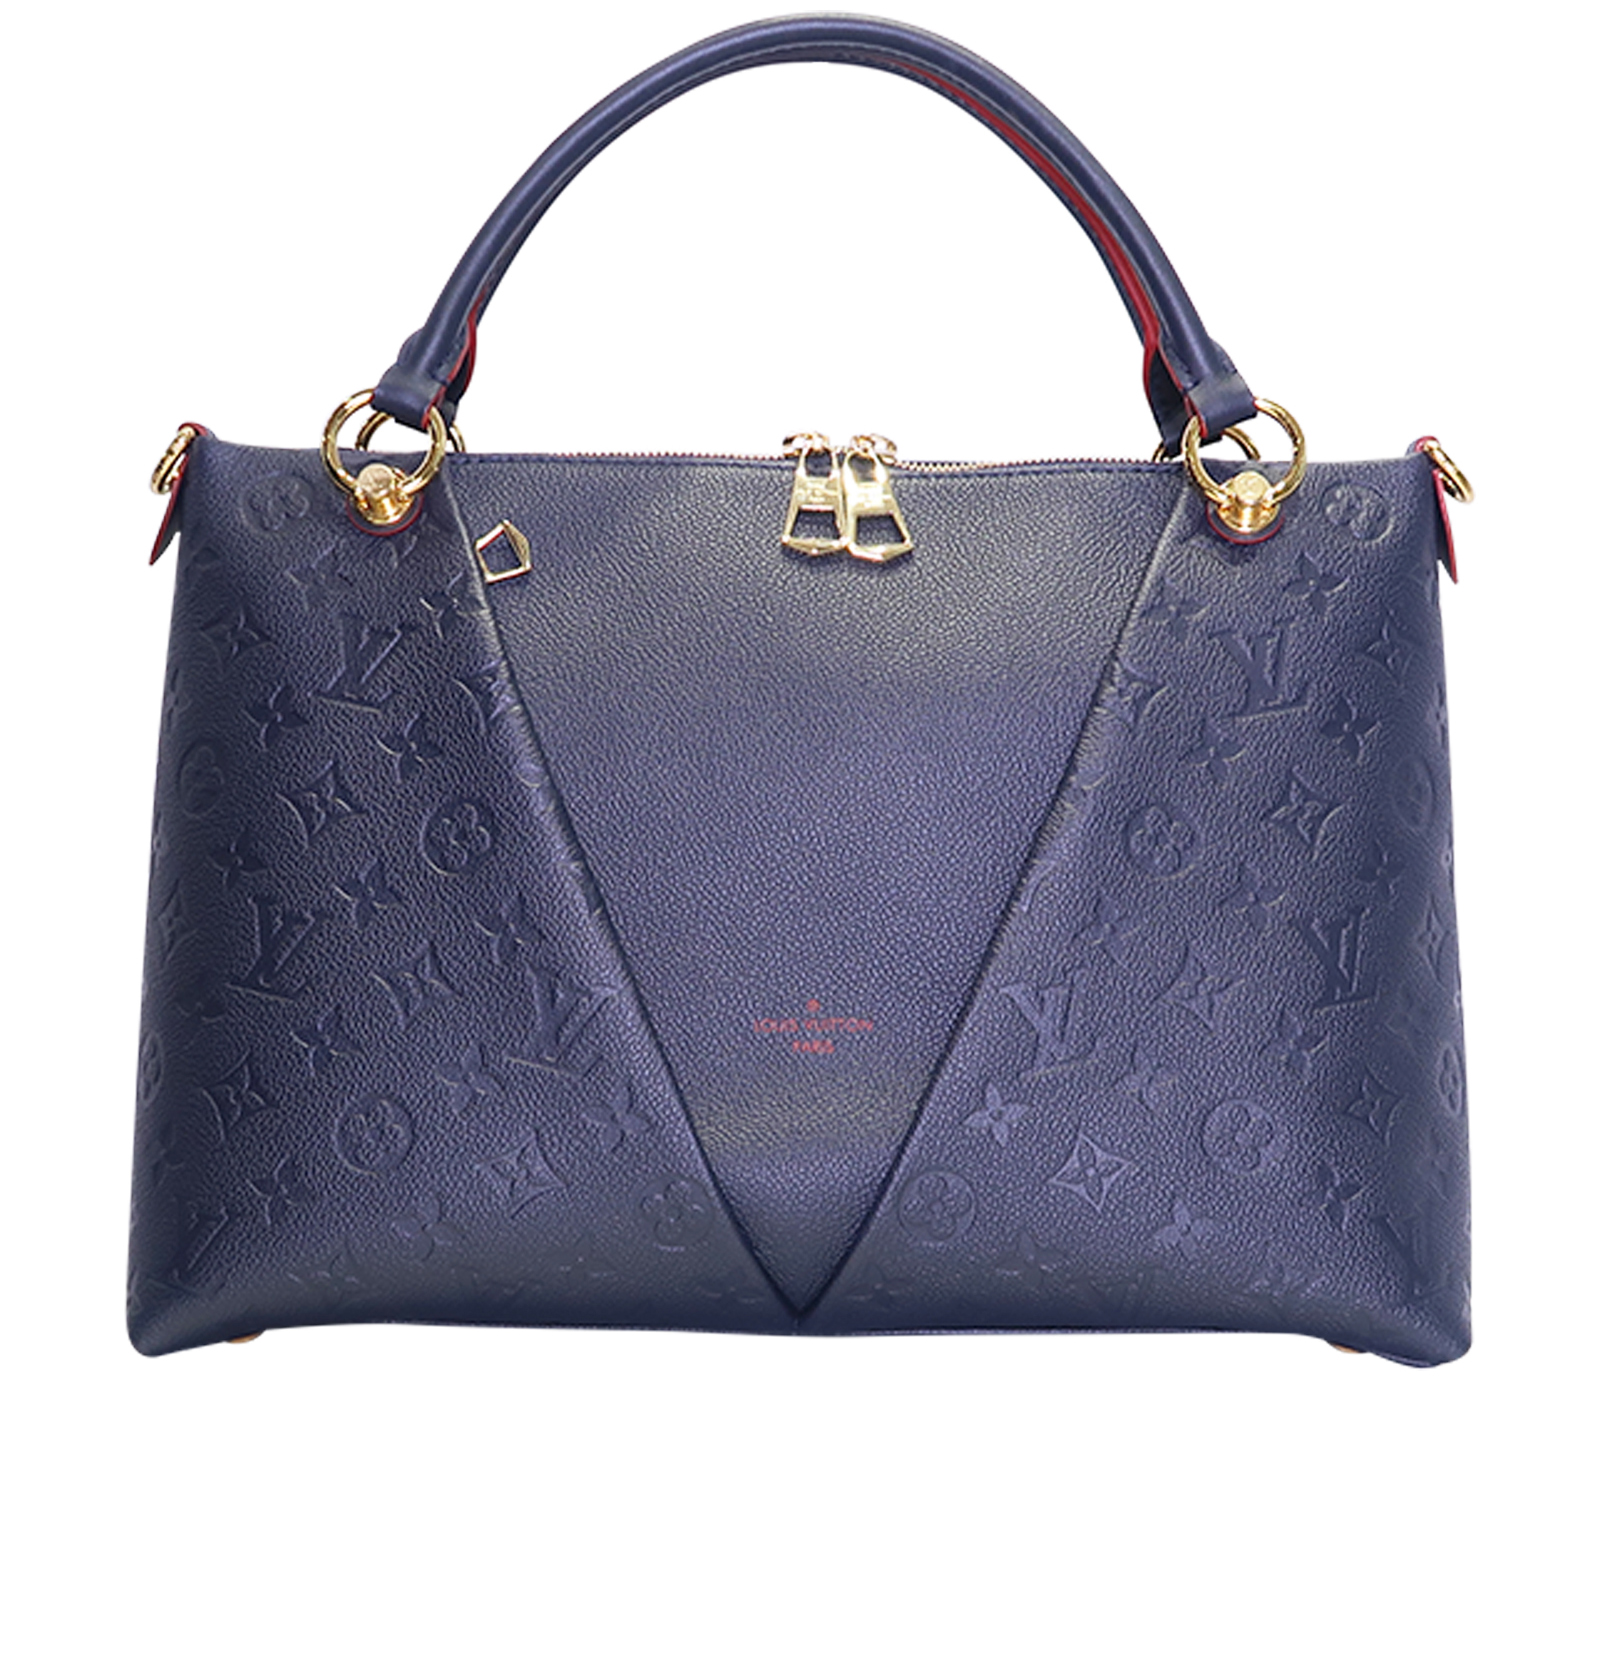 Order Louis Vuitton Tote Bag Online From PR Collection,Delhi